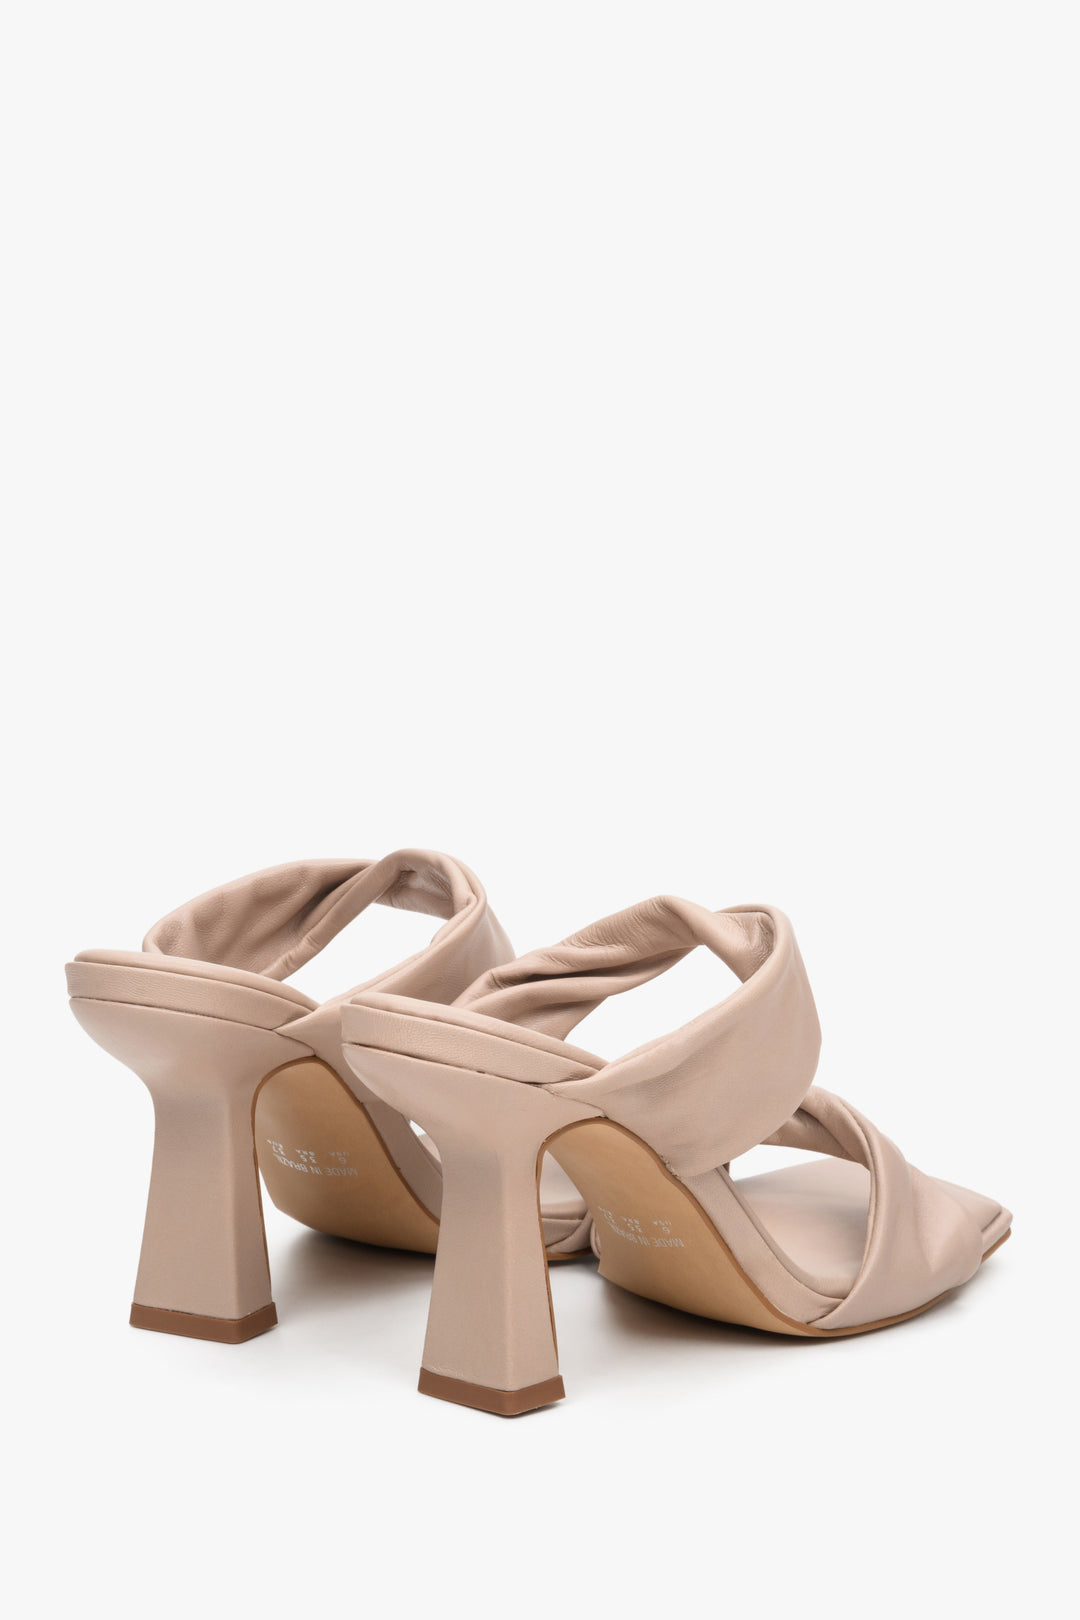 Women's beige leather heeled sandals - close-up on the heel.